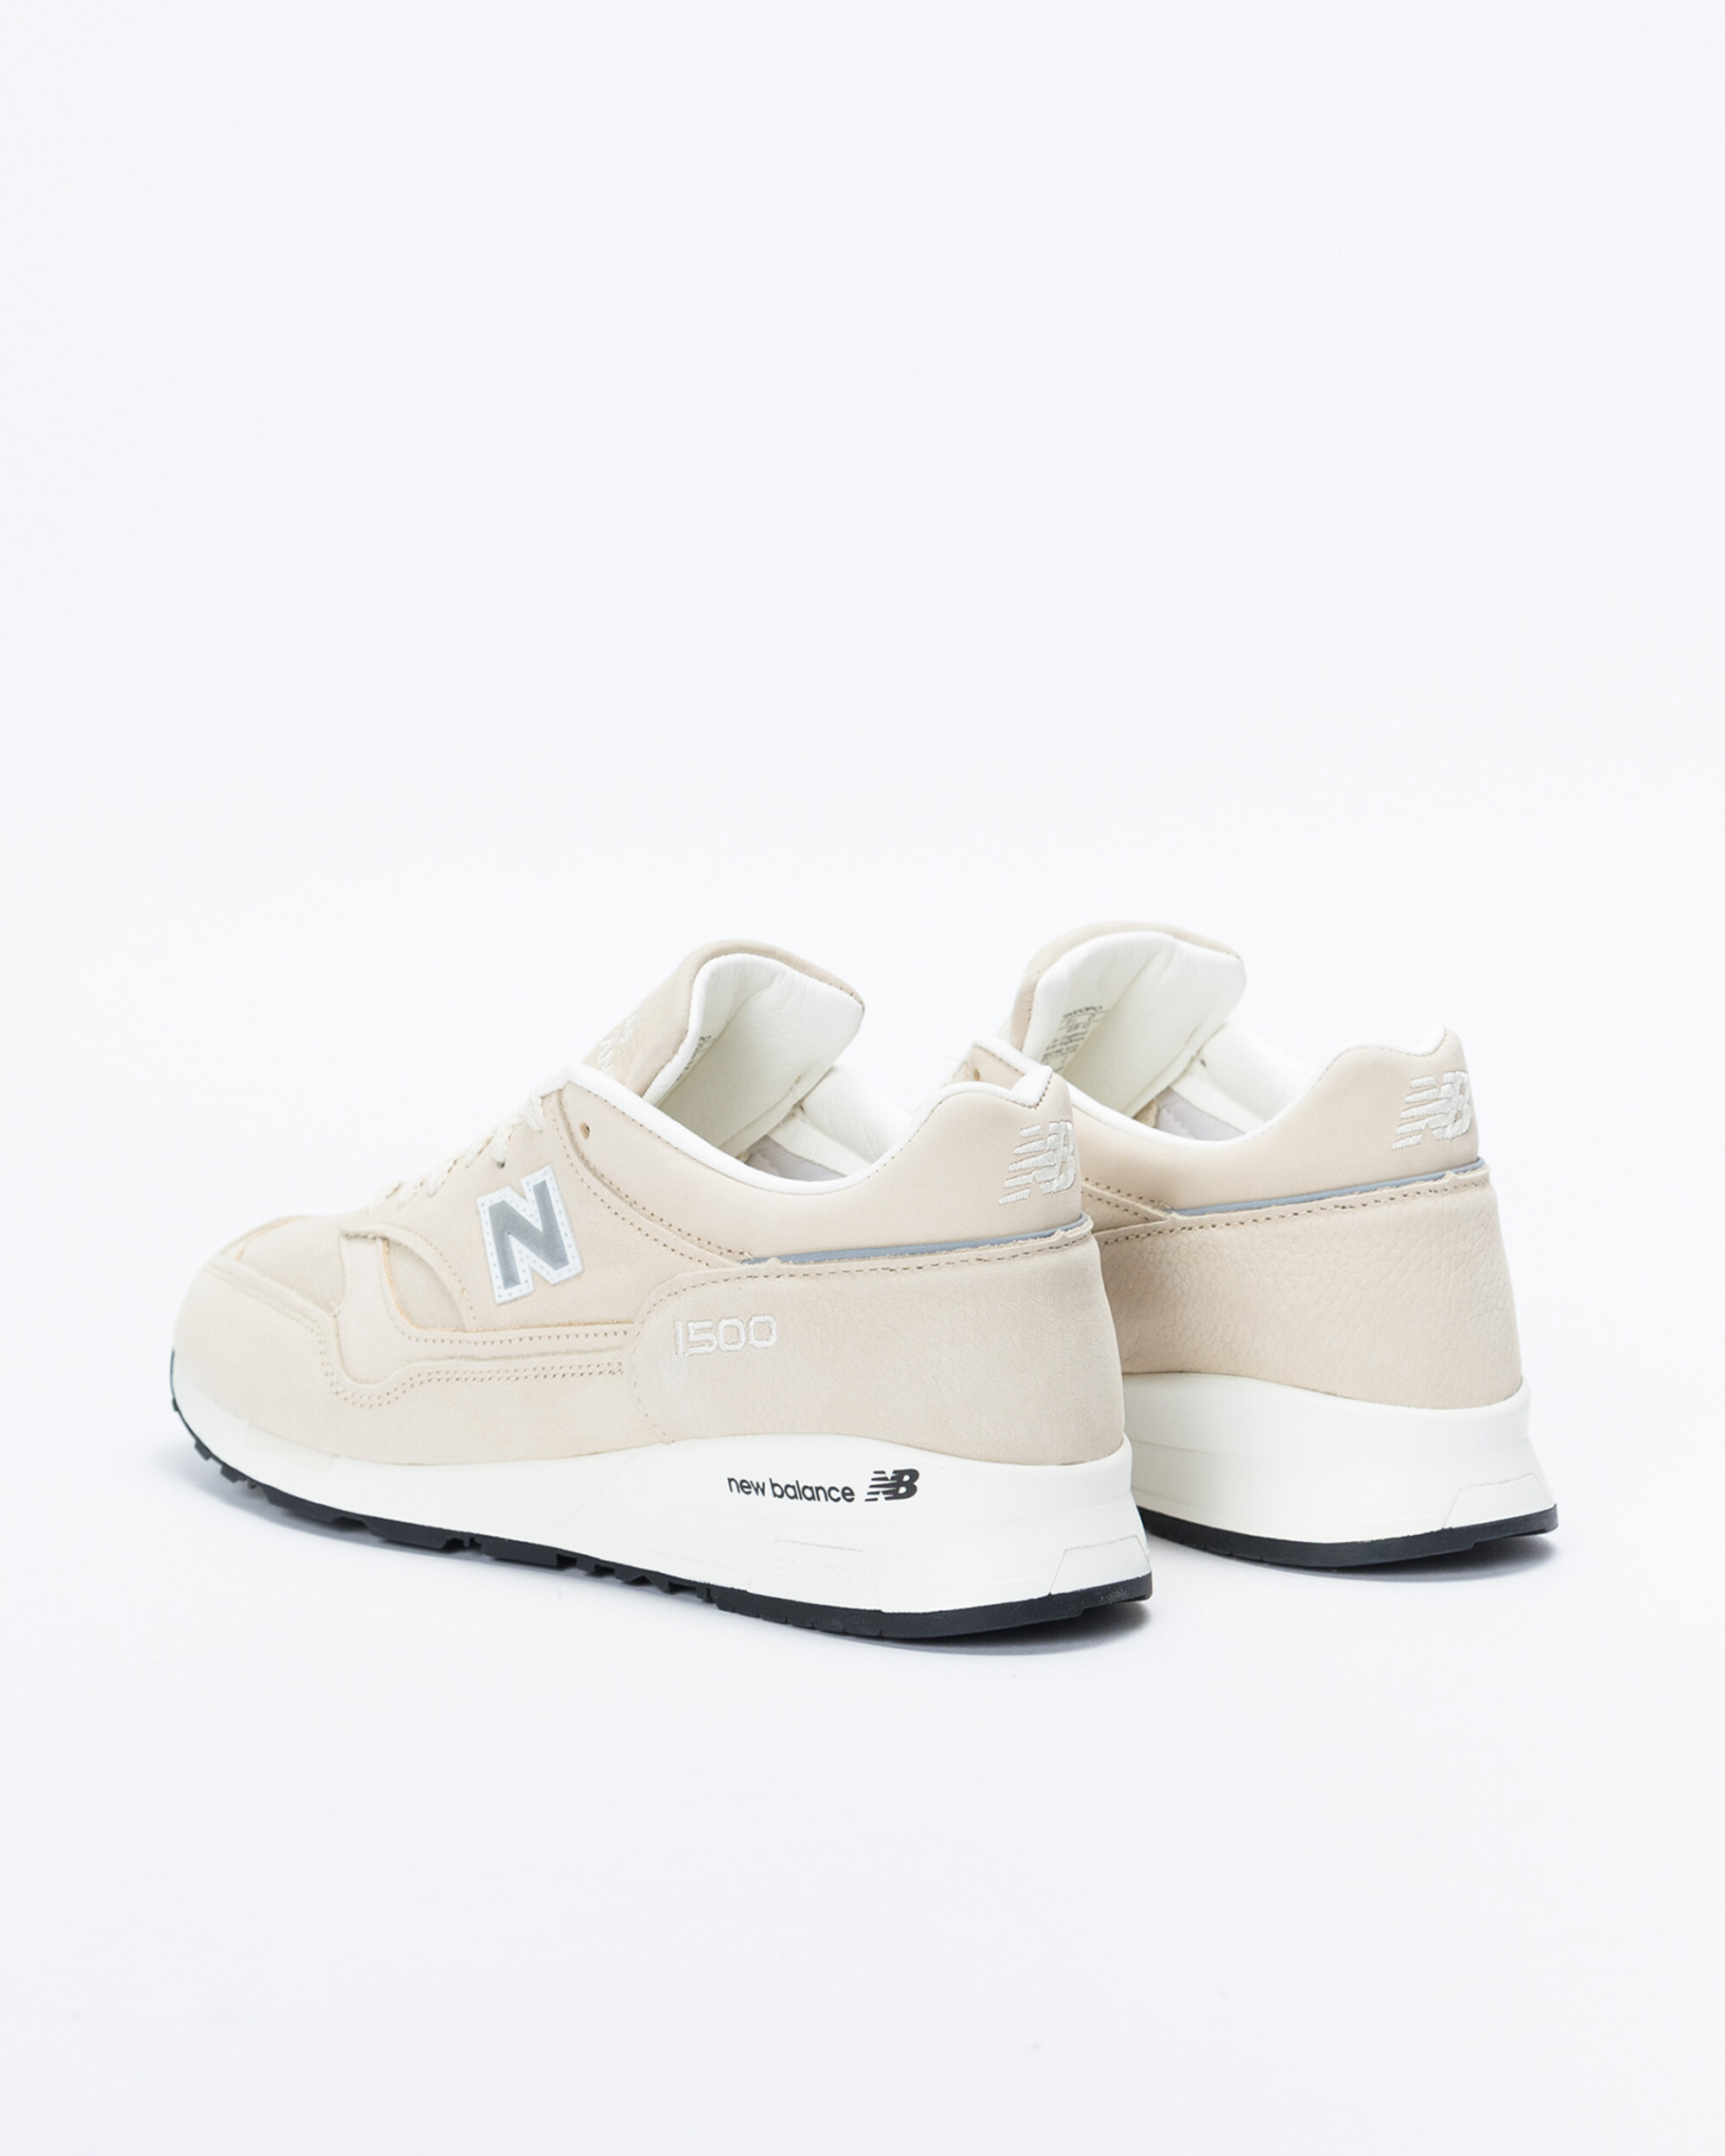 New Balance x Pop Trading Co M1500 Offwhite